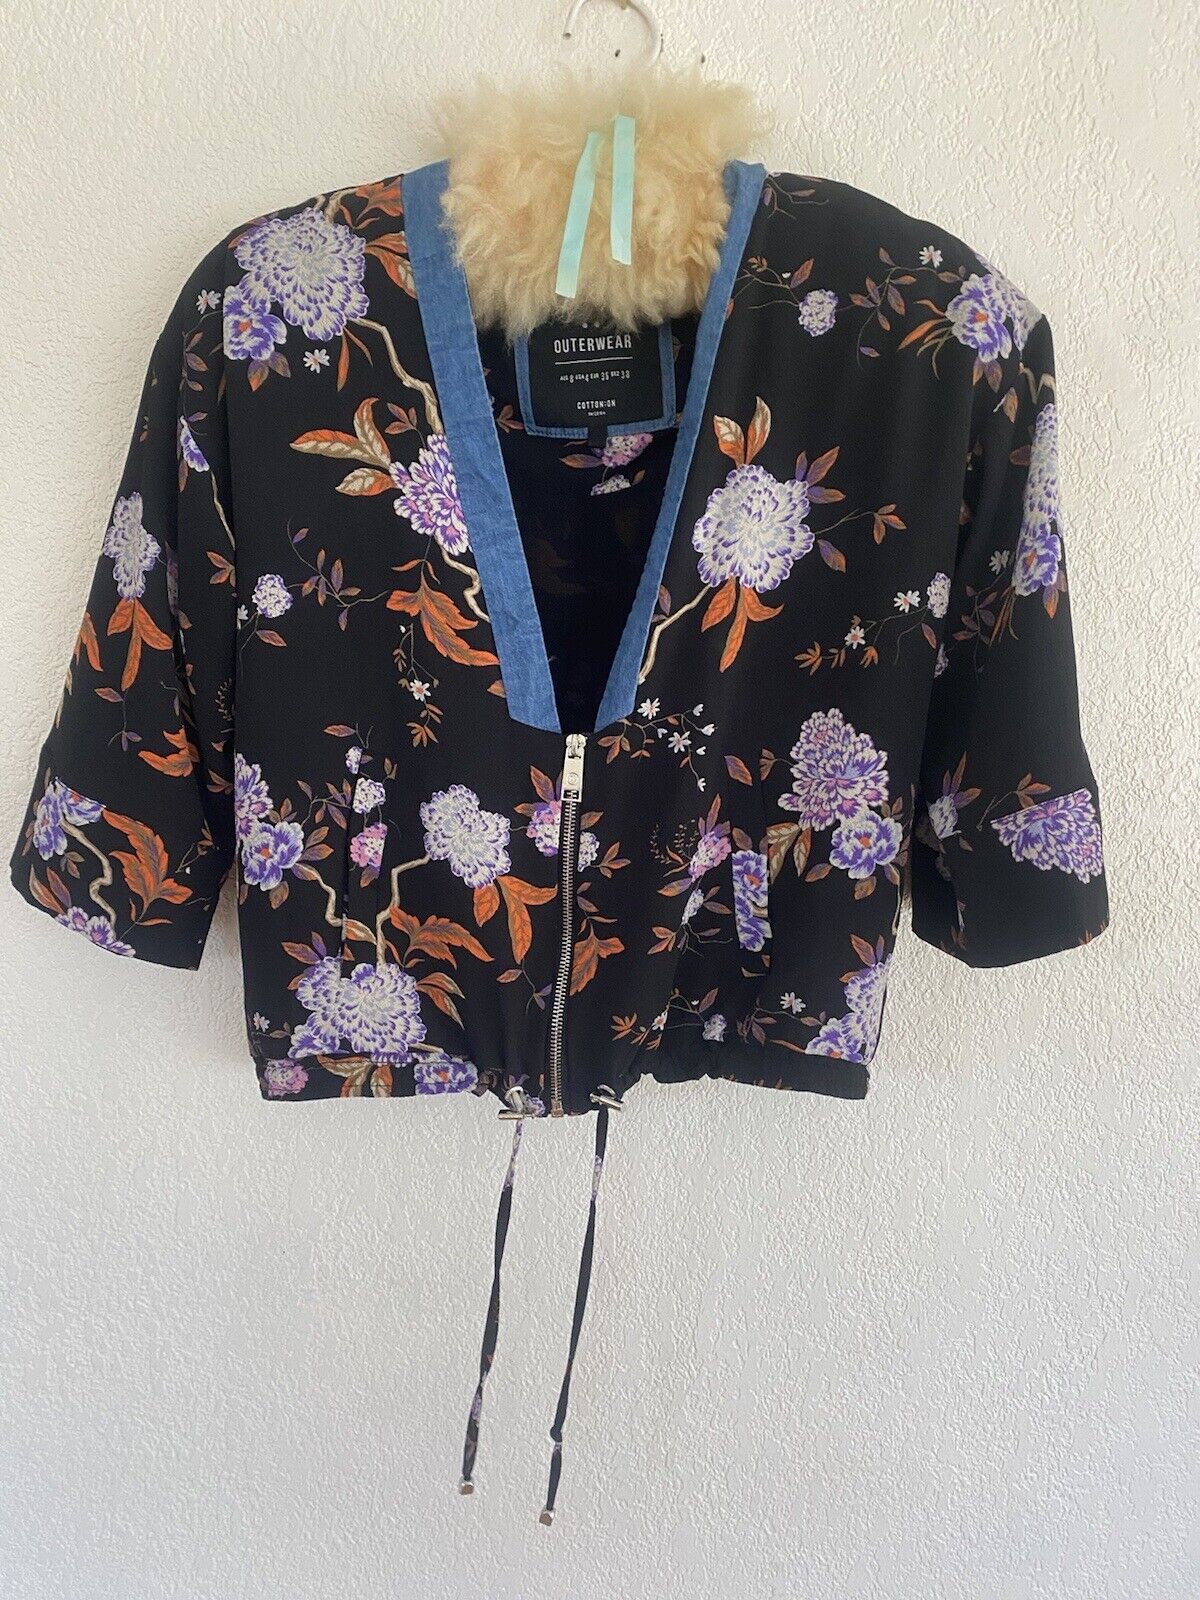 Black Floral Jacket - Cotton On - Size Small